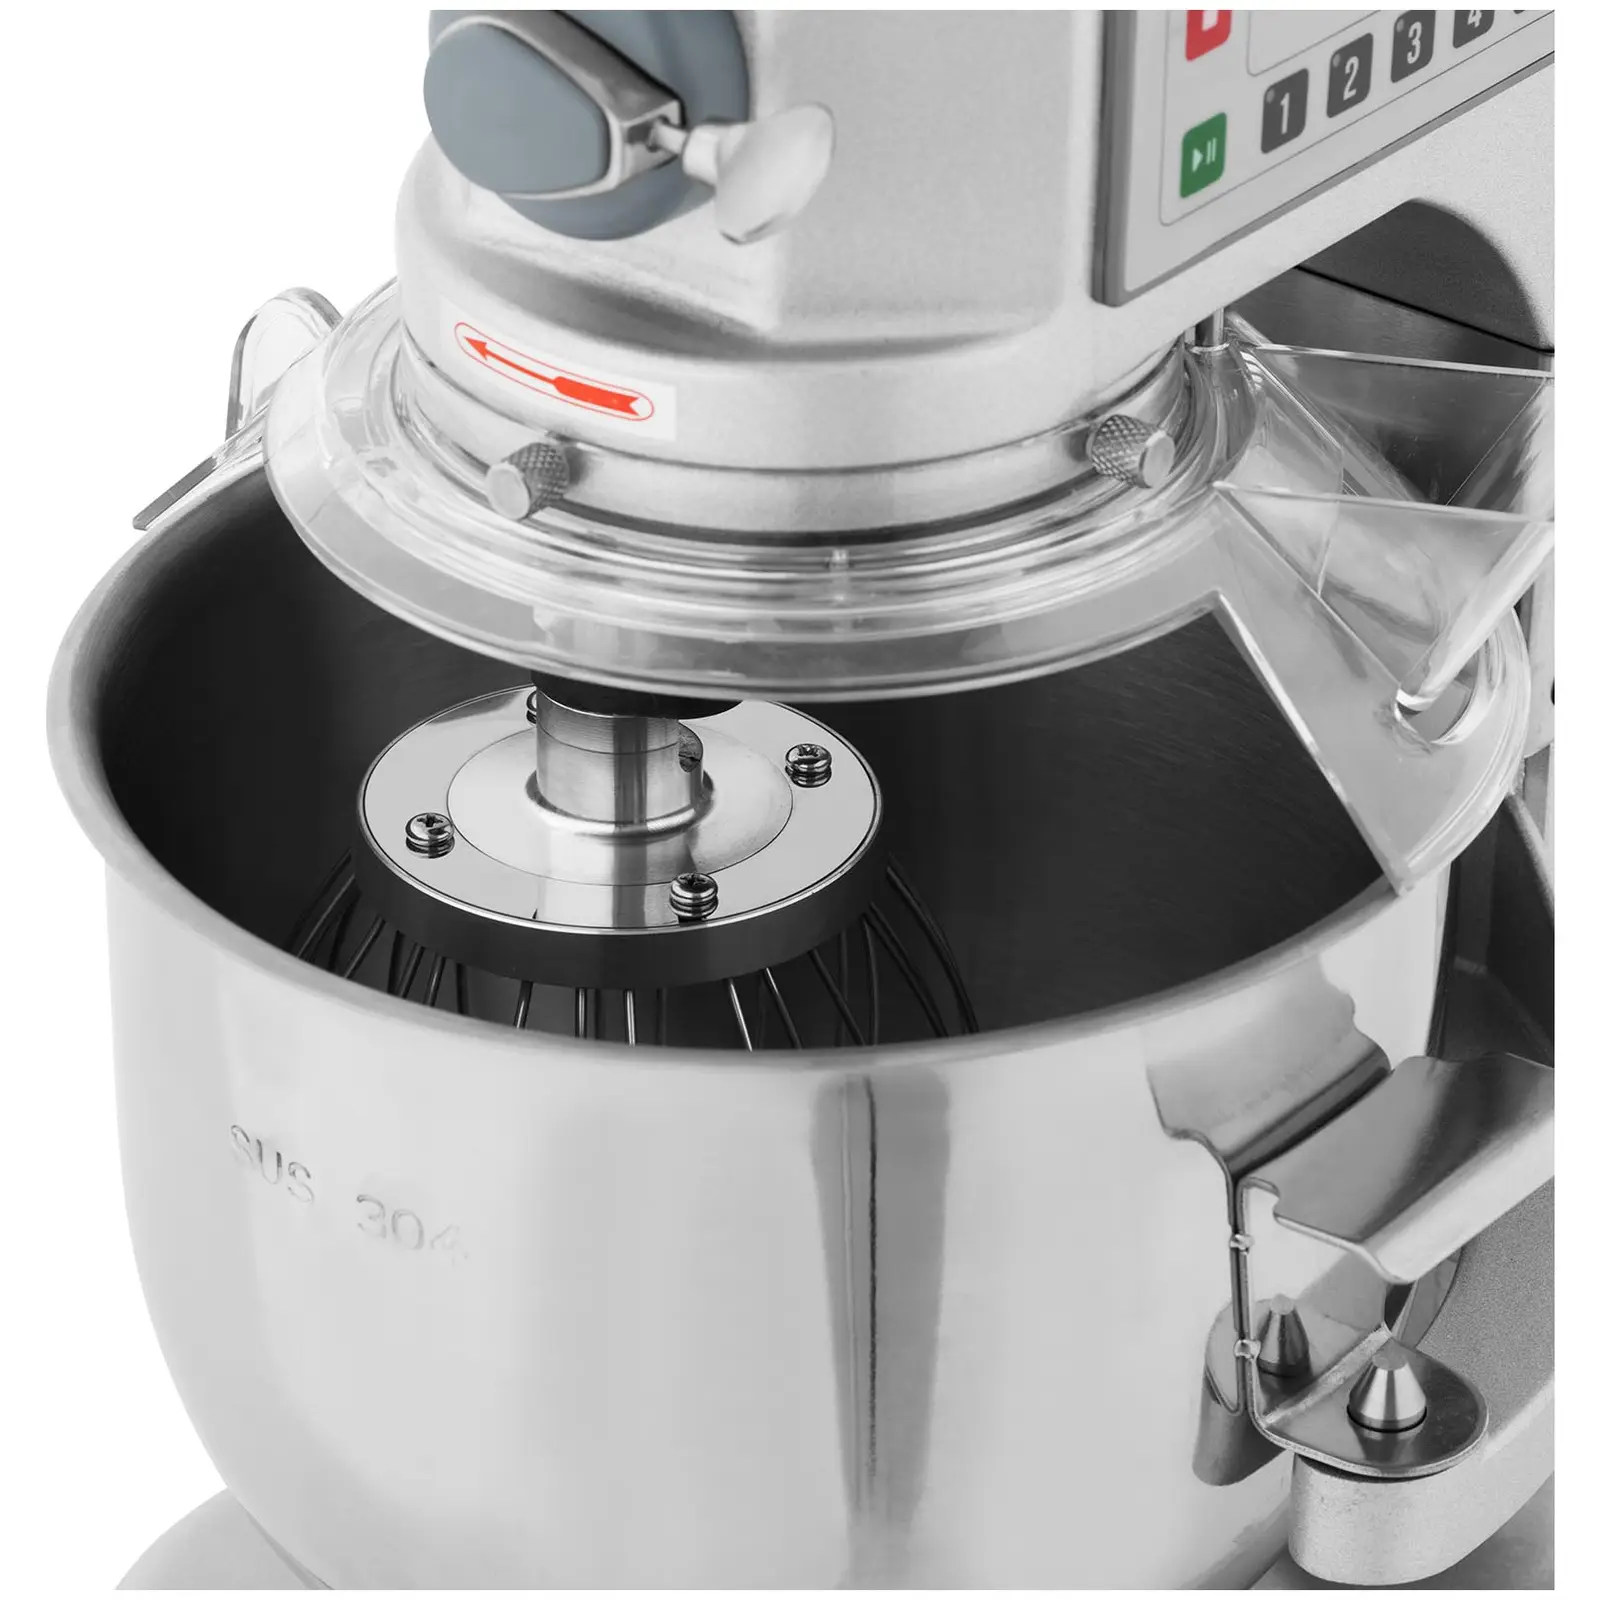 Kneading Machine - 650 W - Royal Catering